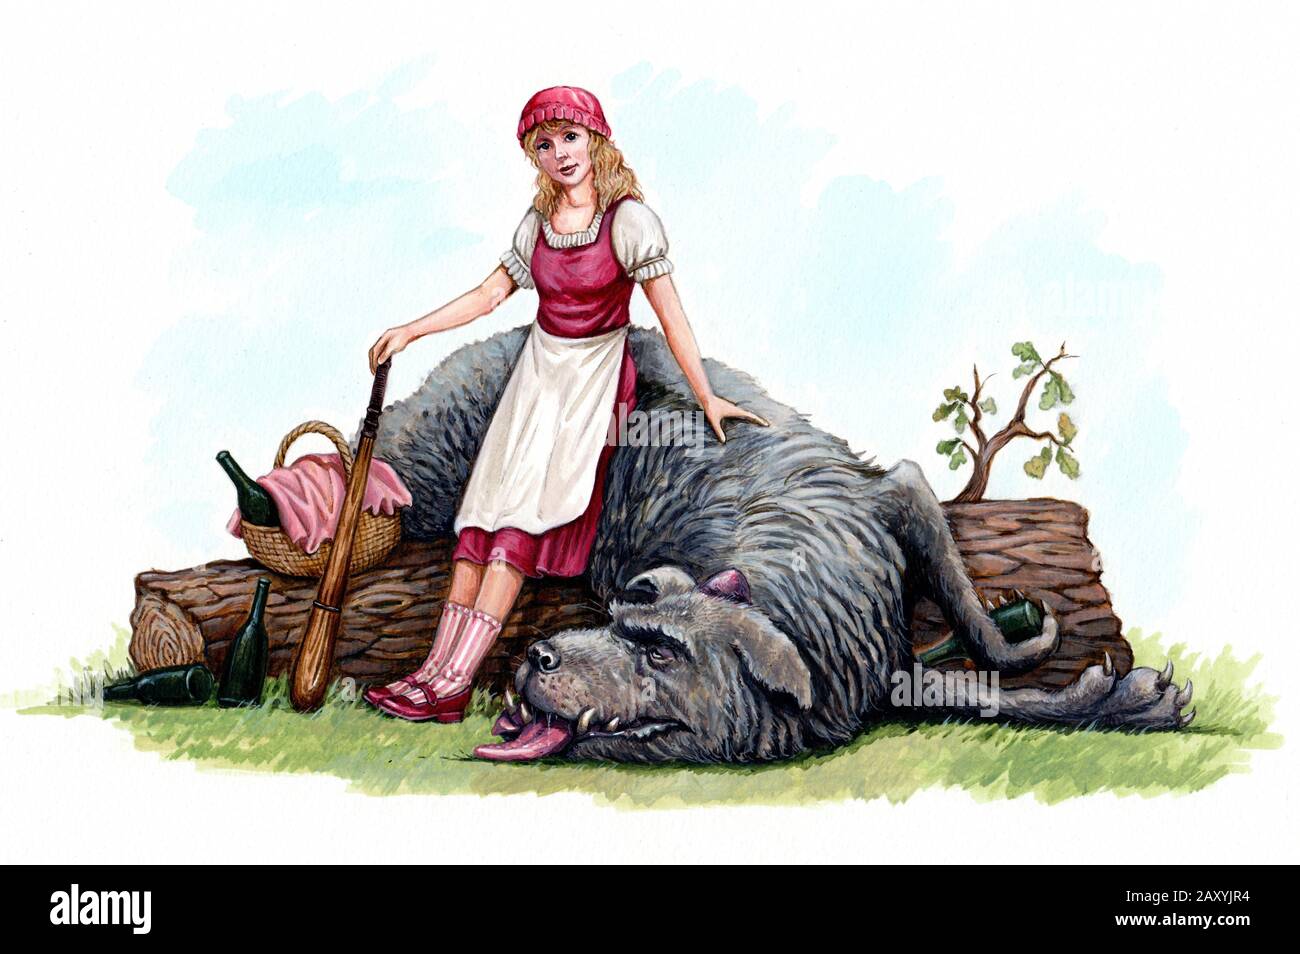 Red Cap Riding Hood High Resolution Stock Photography And Images Alamy